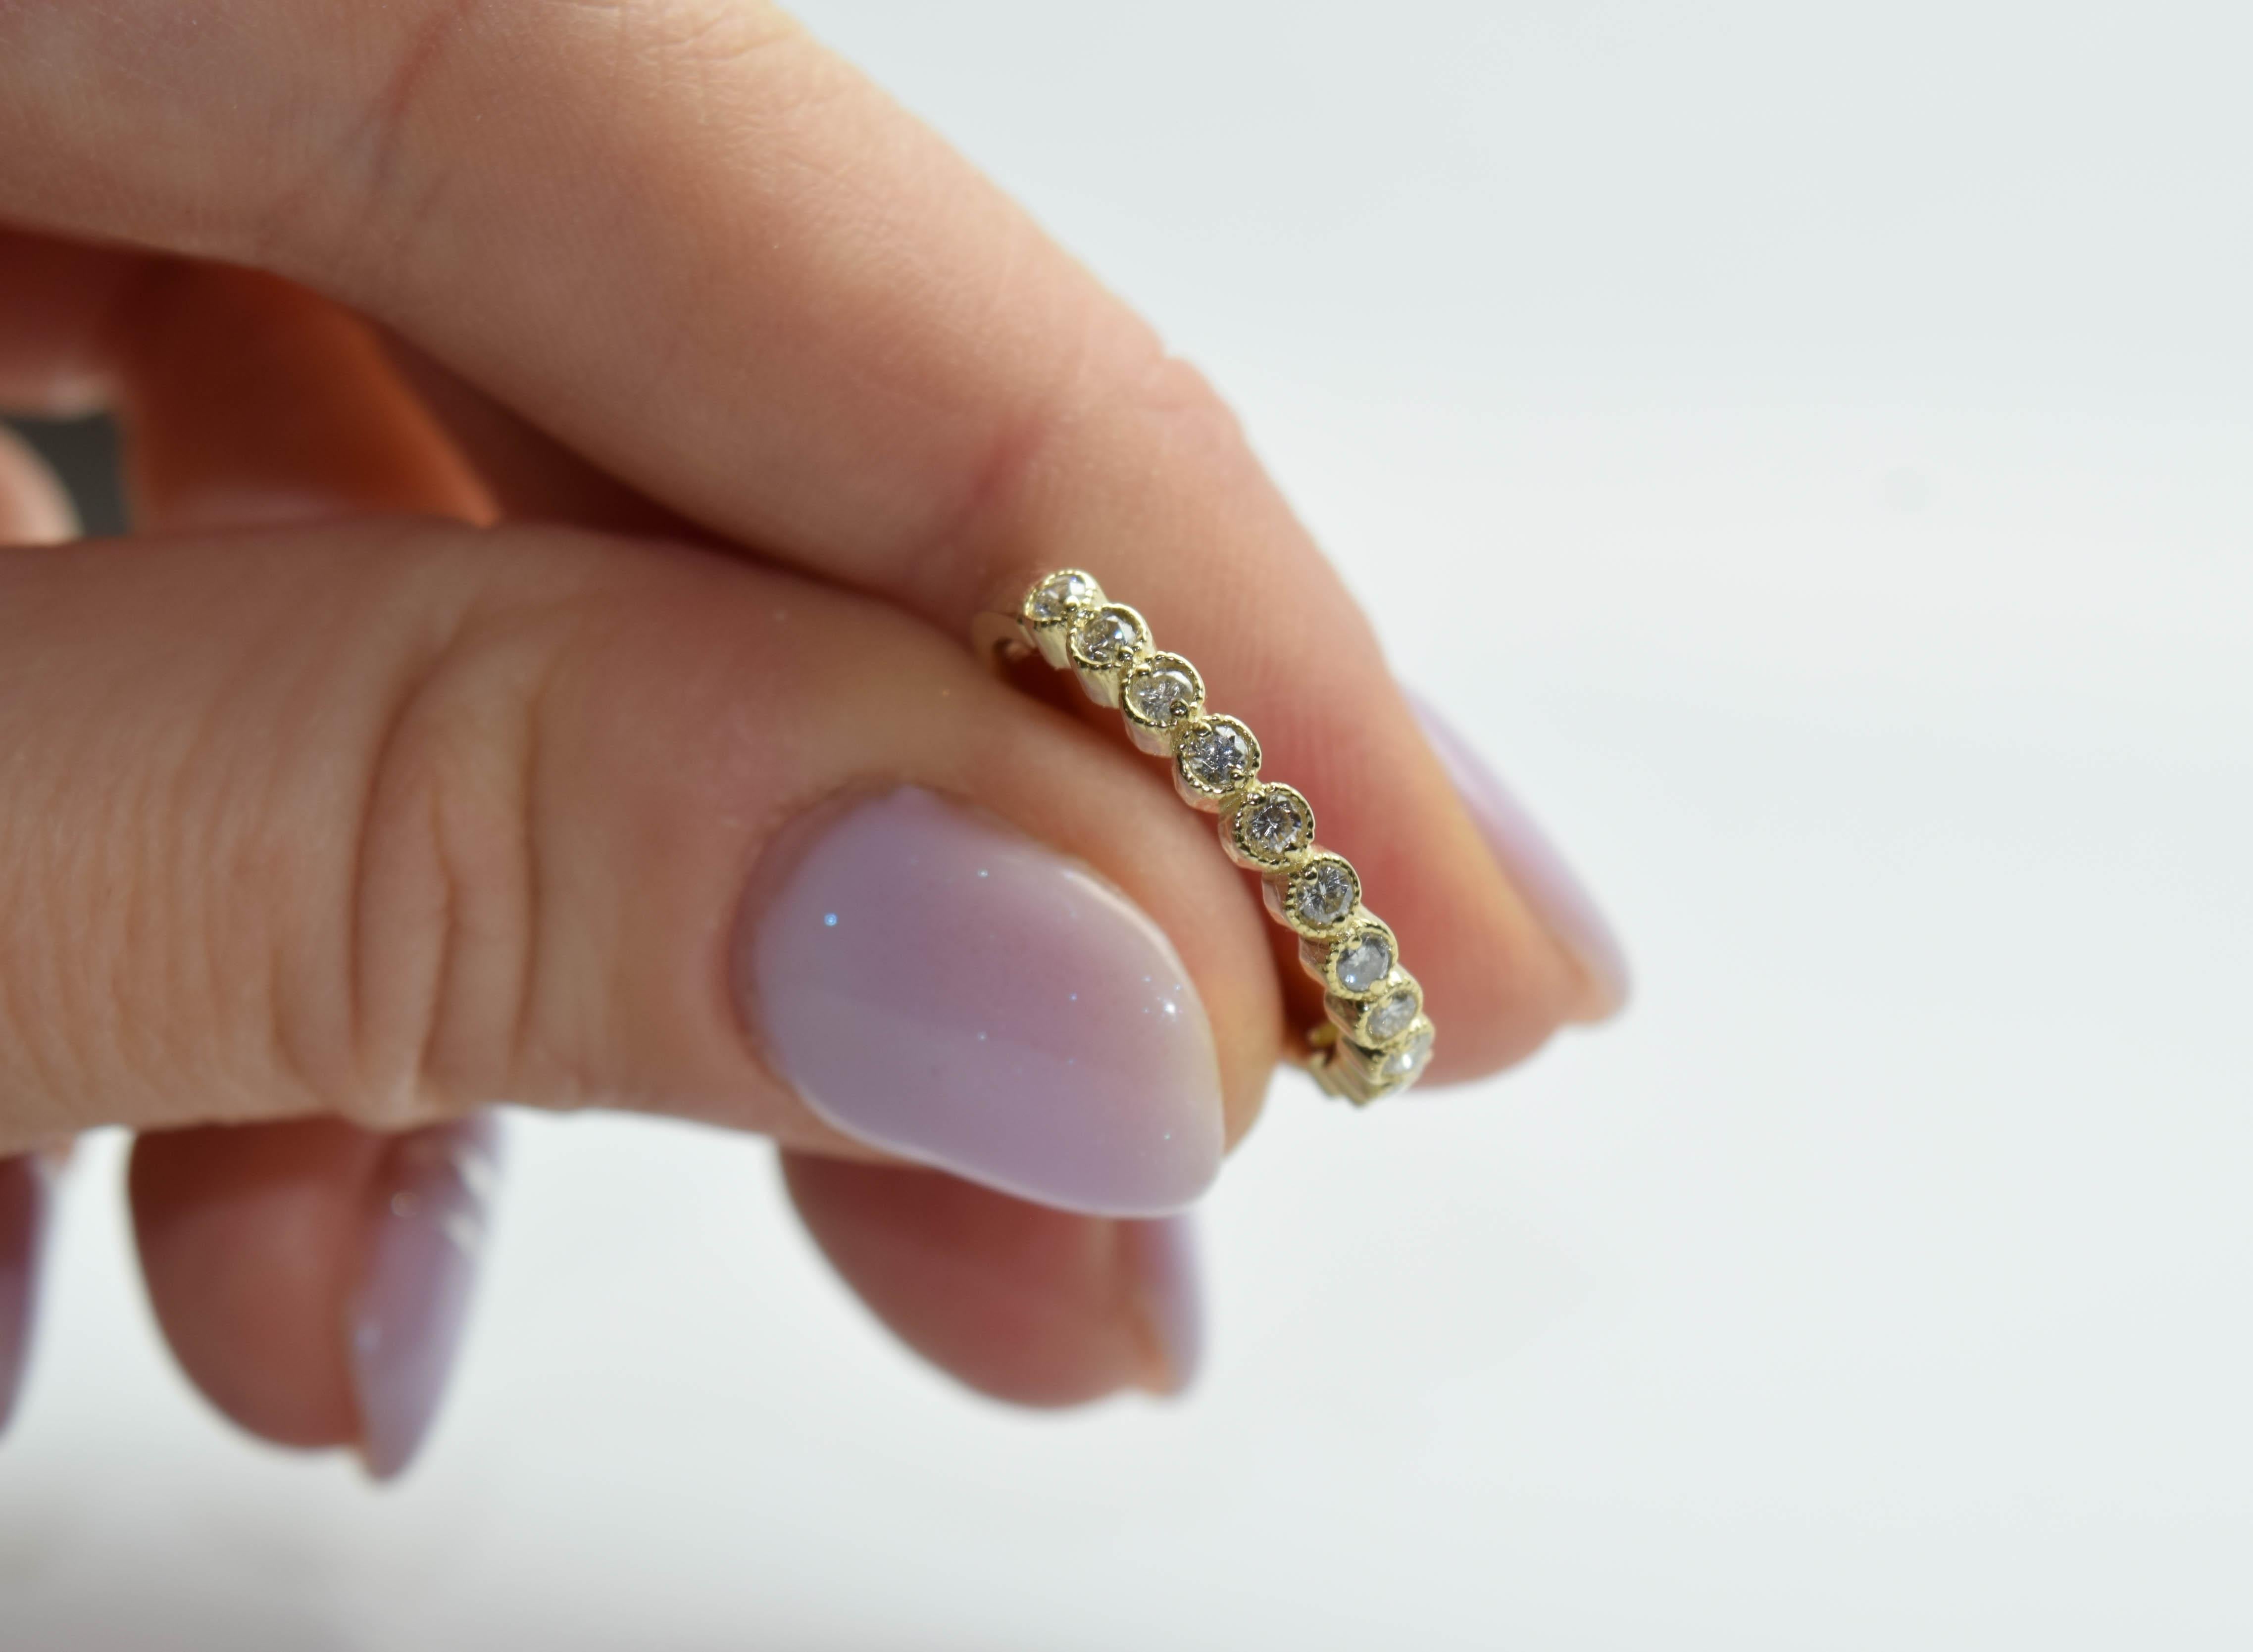 Beautiful simple diamond ring made with 12 diamonds in 14KT yellow gold, hand finished with tiny milgrain balls around each bezel which gives the ring a vintage feel and look.

Metal Type: 14KT
Natural Side Diamond(s):
Color: G-H
Cut:Round